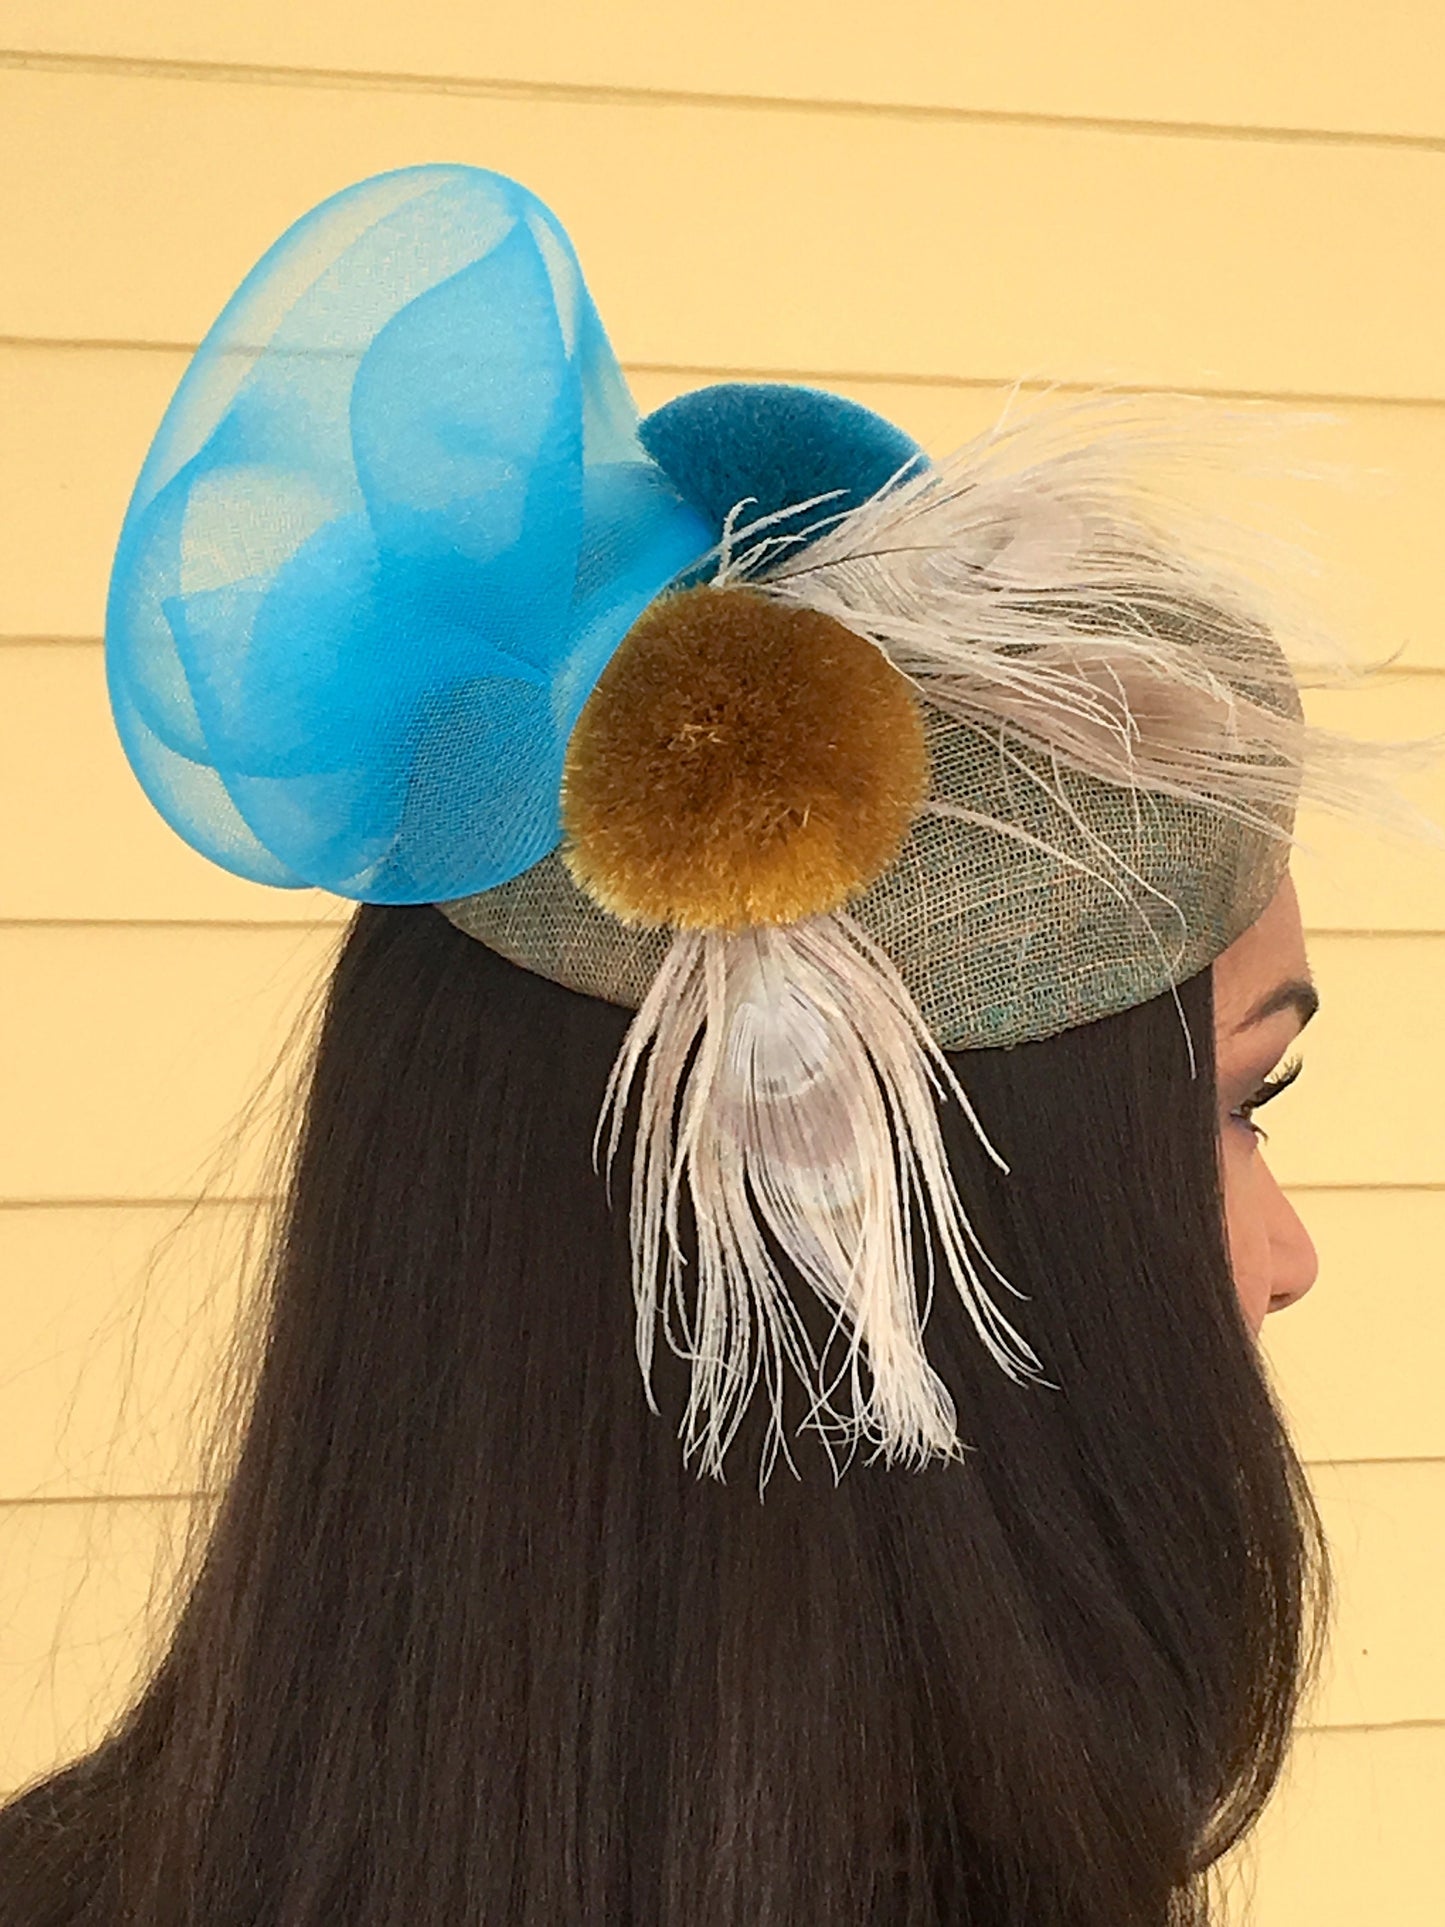 Taupe and Turquoise Sinamay Pill Box Hat-Silk Pom Poms-Peacock feathers-Crinoline-Race Track hat-Party hat-Royal Ascot-Belmount-Preakness